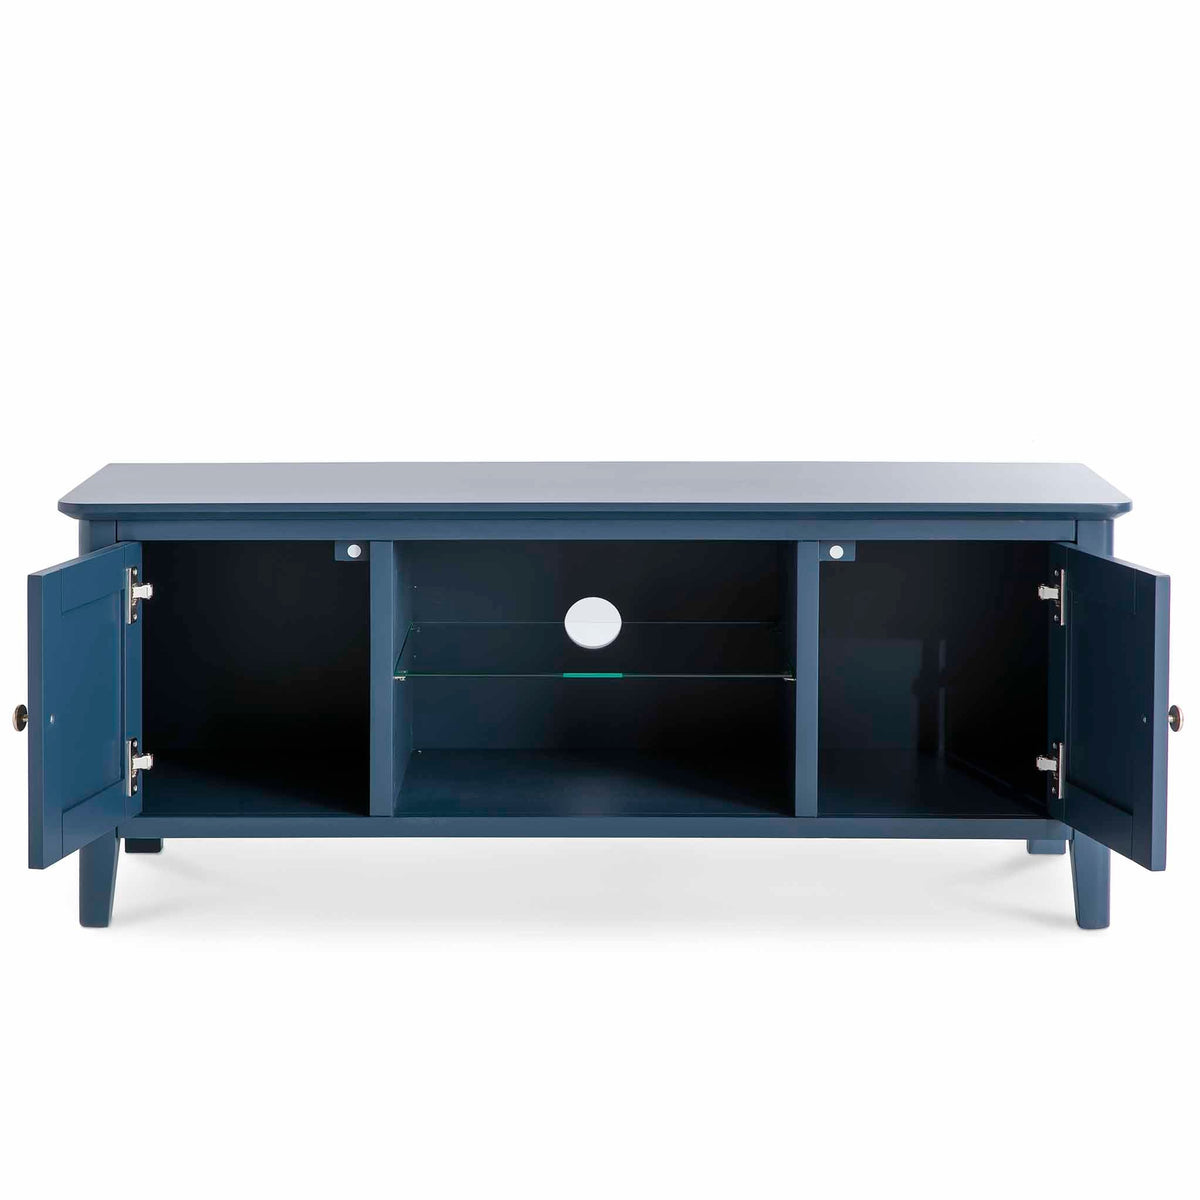 Stirling Blue 120cm Large TV Unit - Front view with cupboard doors open